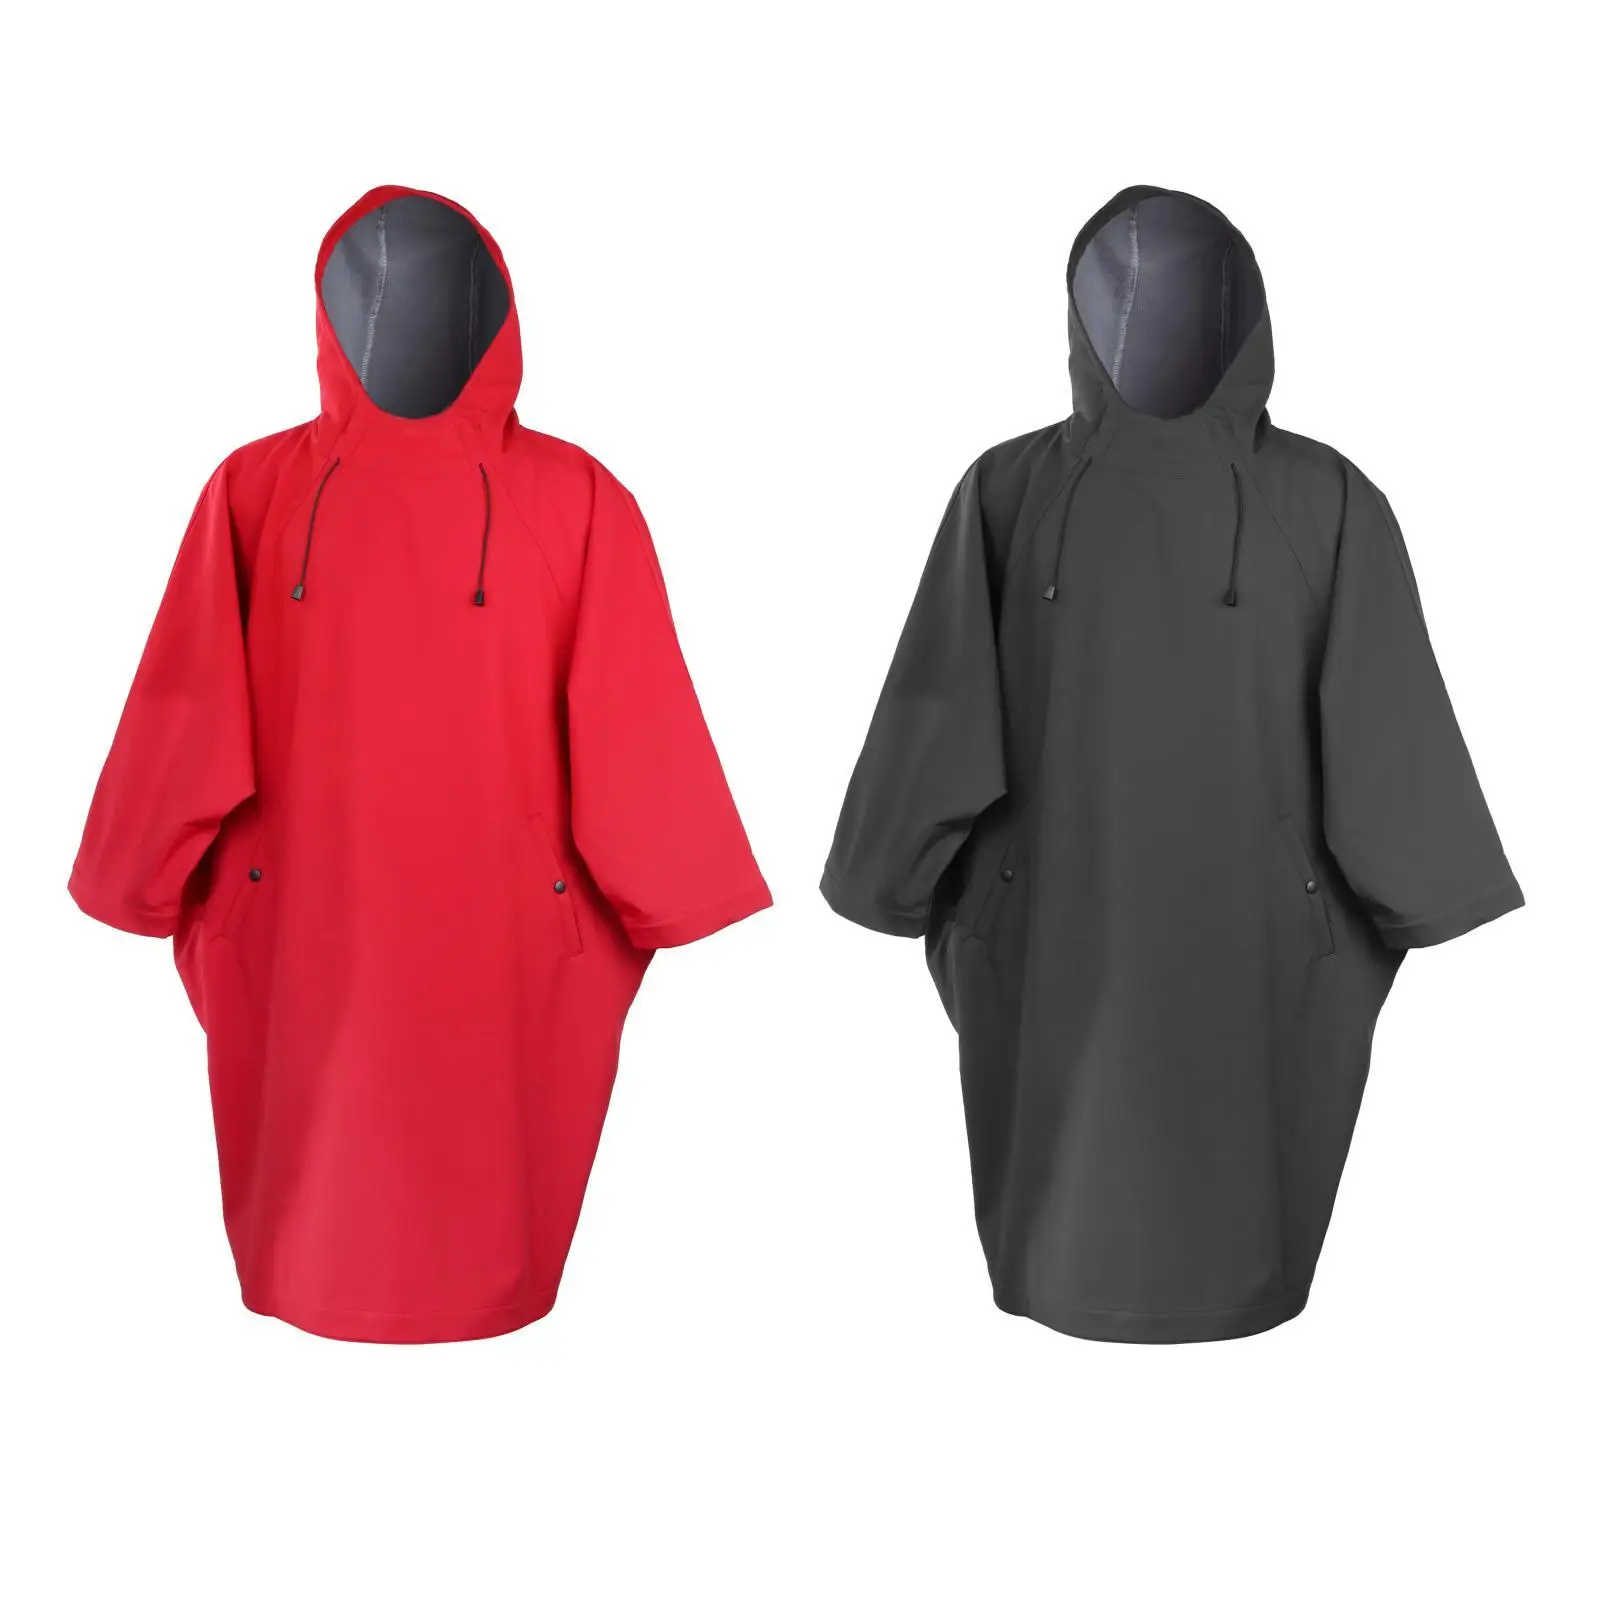 Surf Changing Robe Adults Unisex Beach Swimming Coat Jacket Outwear Poncho 